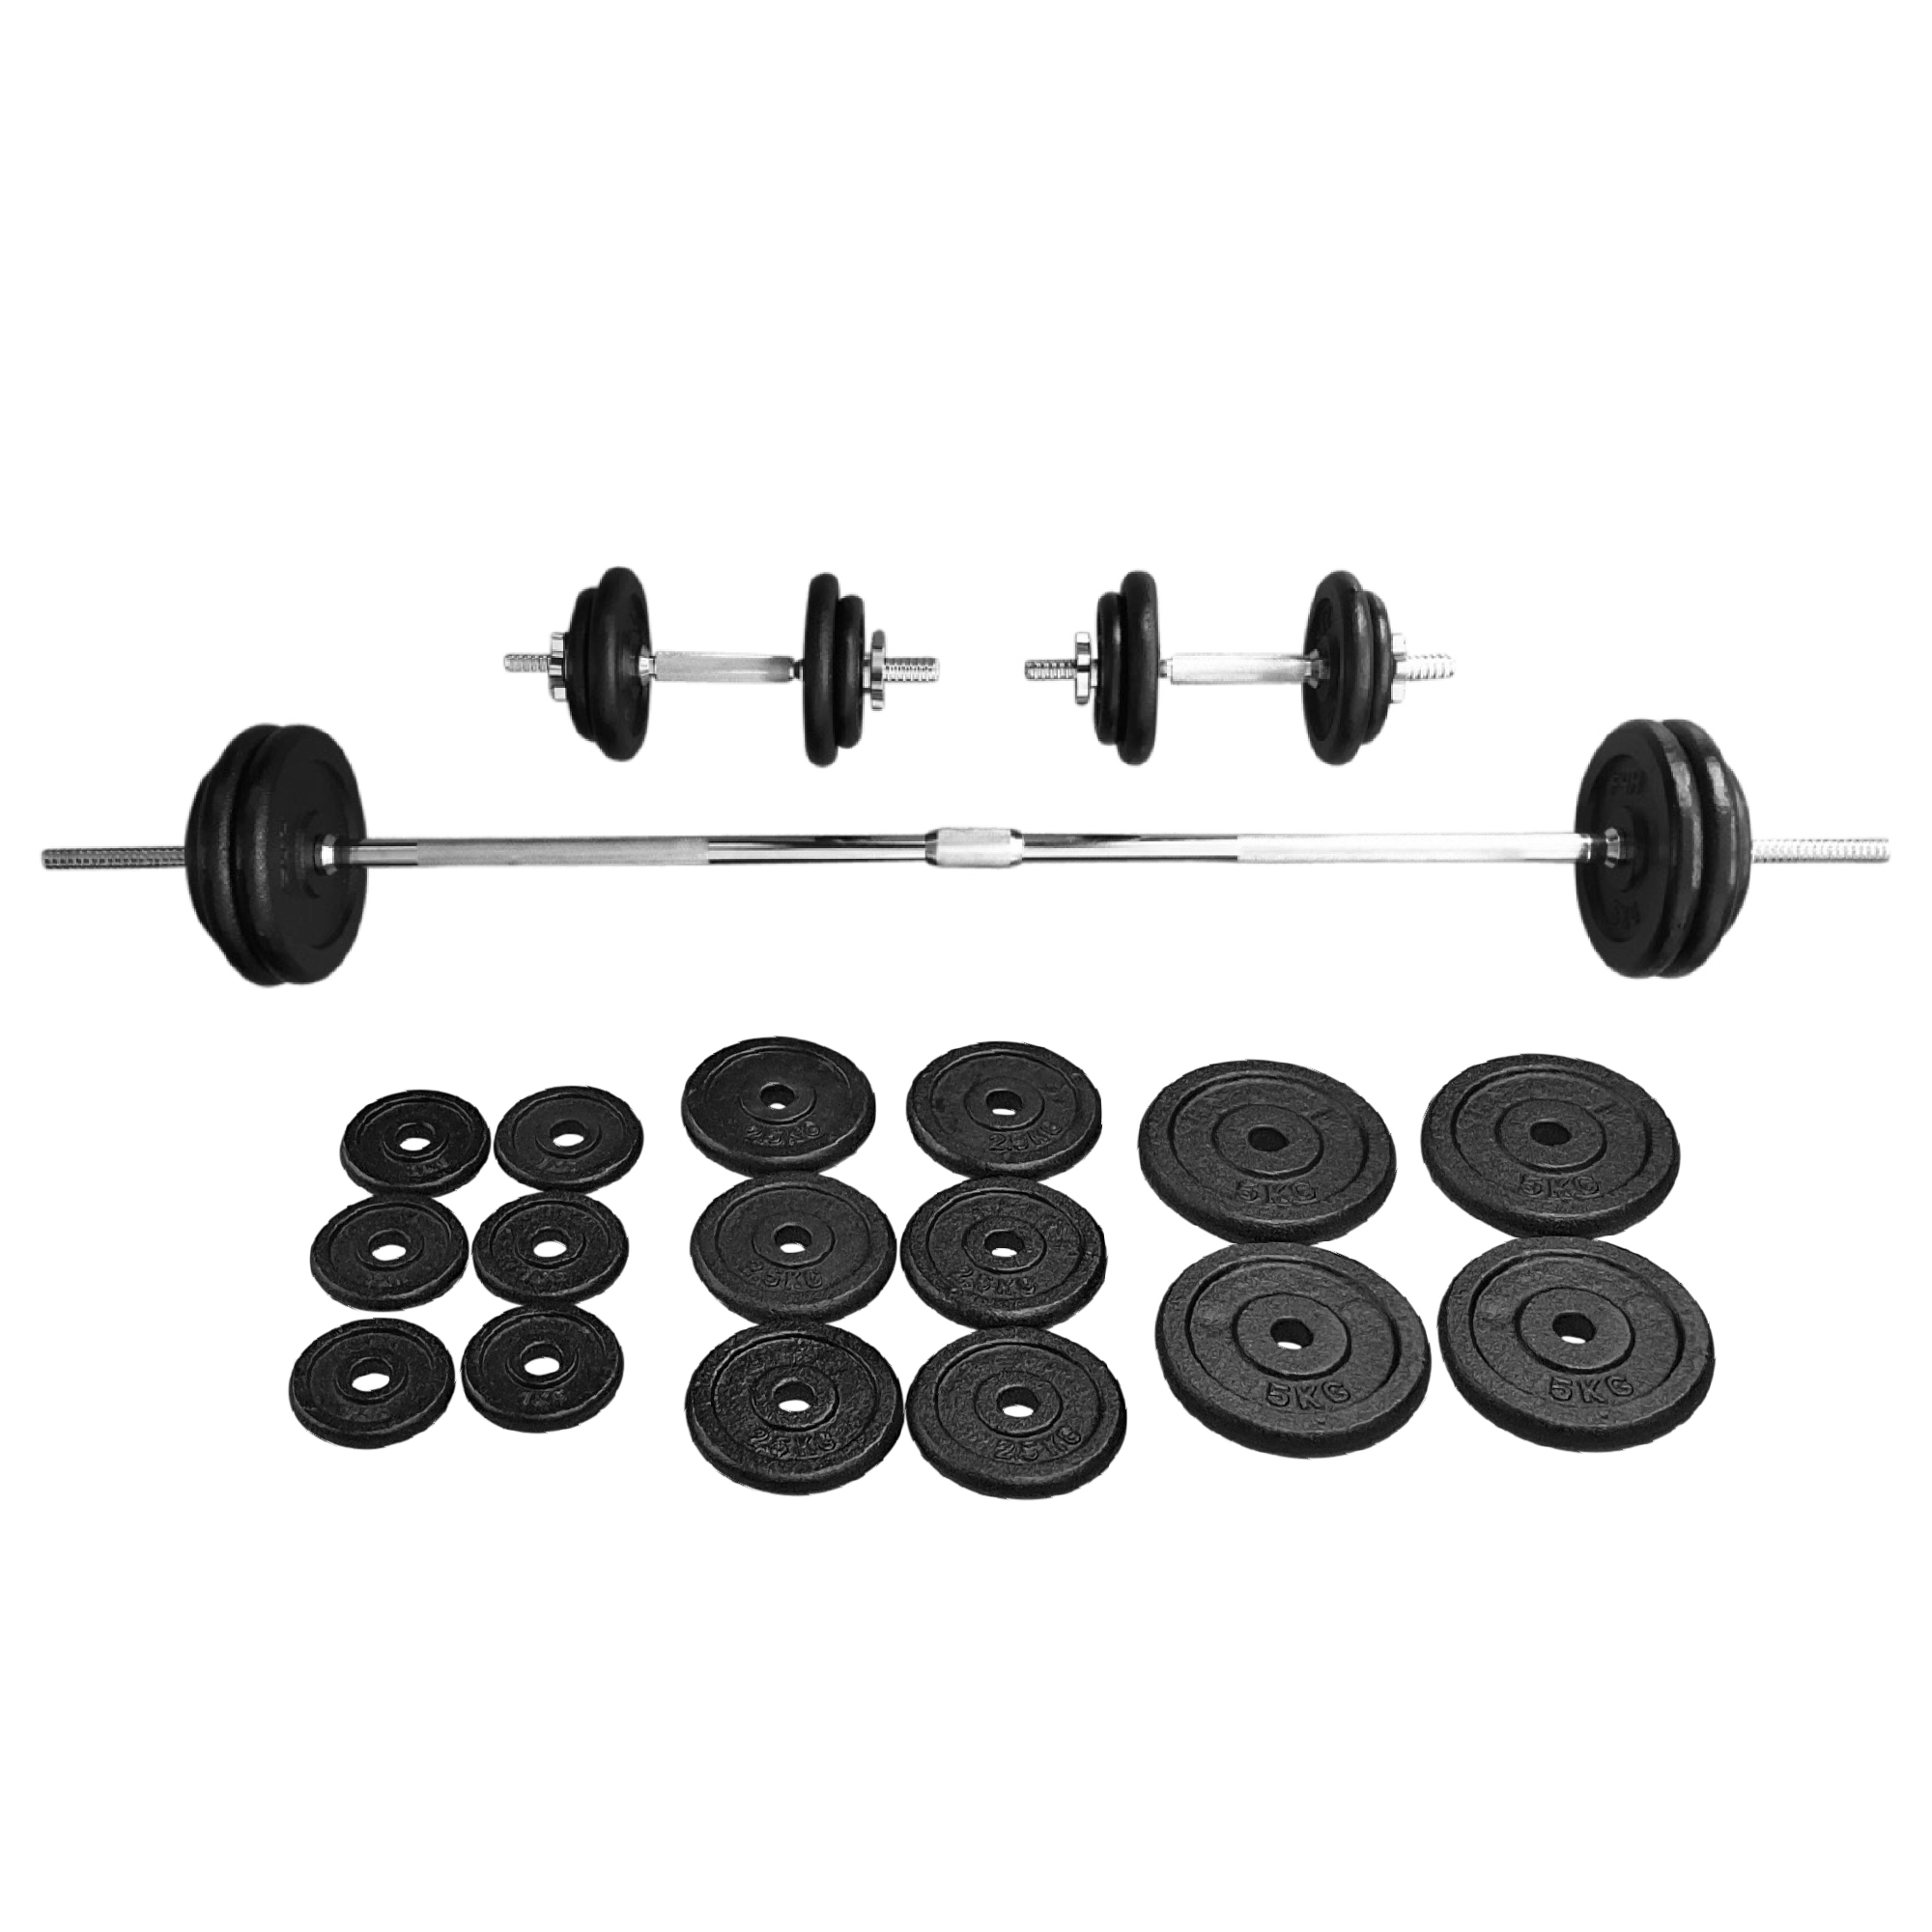 FIT4HOME Weights Dumbbells Barbells Set For Men Women Gym Equipment For Home Adjustable Free Weights Perfect For Strength Training Bodybuilding Weight Lifting Fitness Workout 